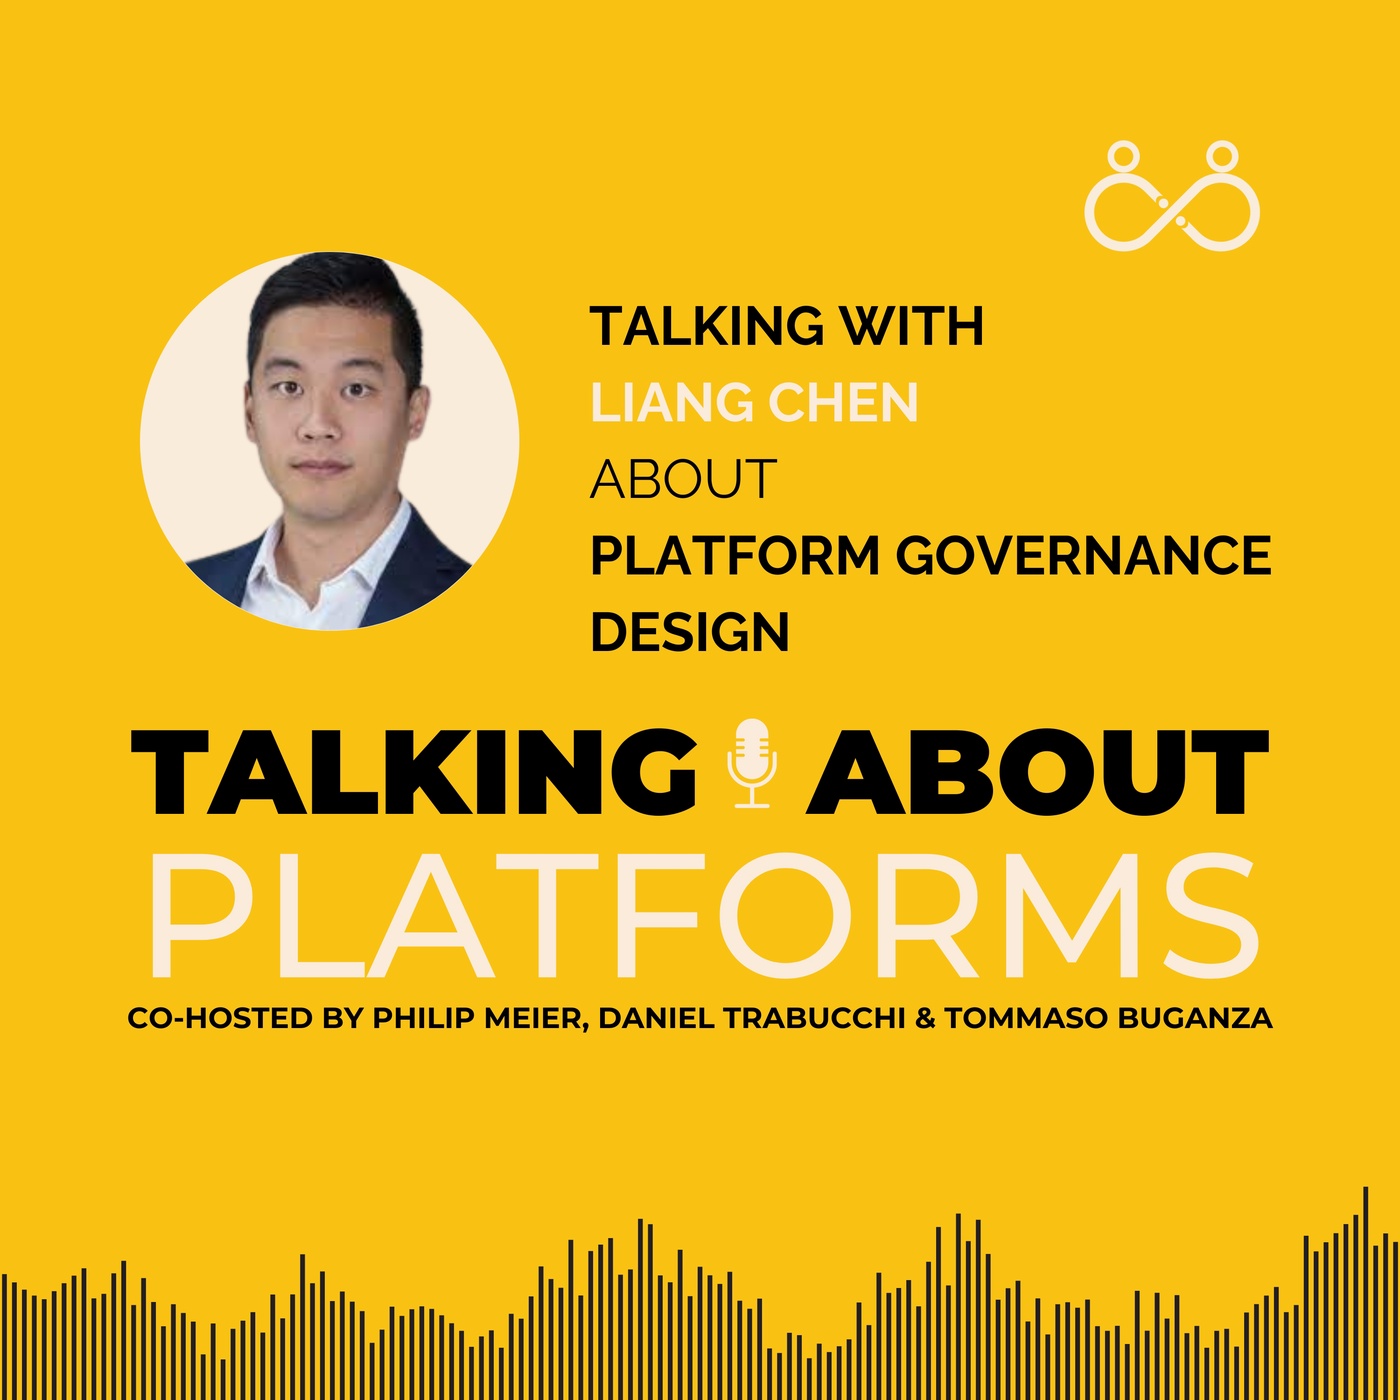 Platform governance design with Liang Chen